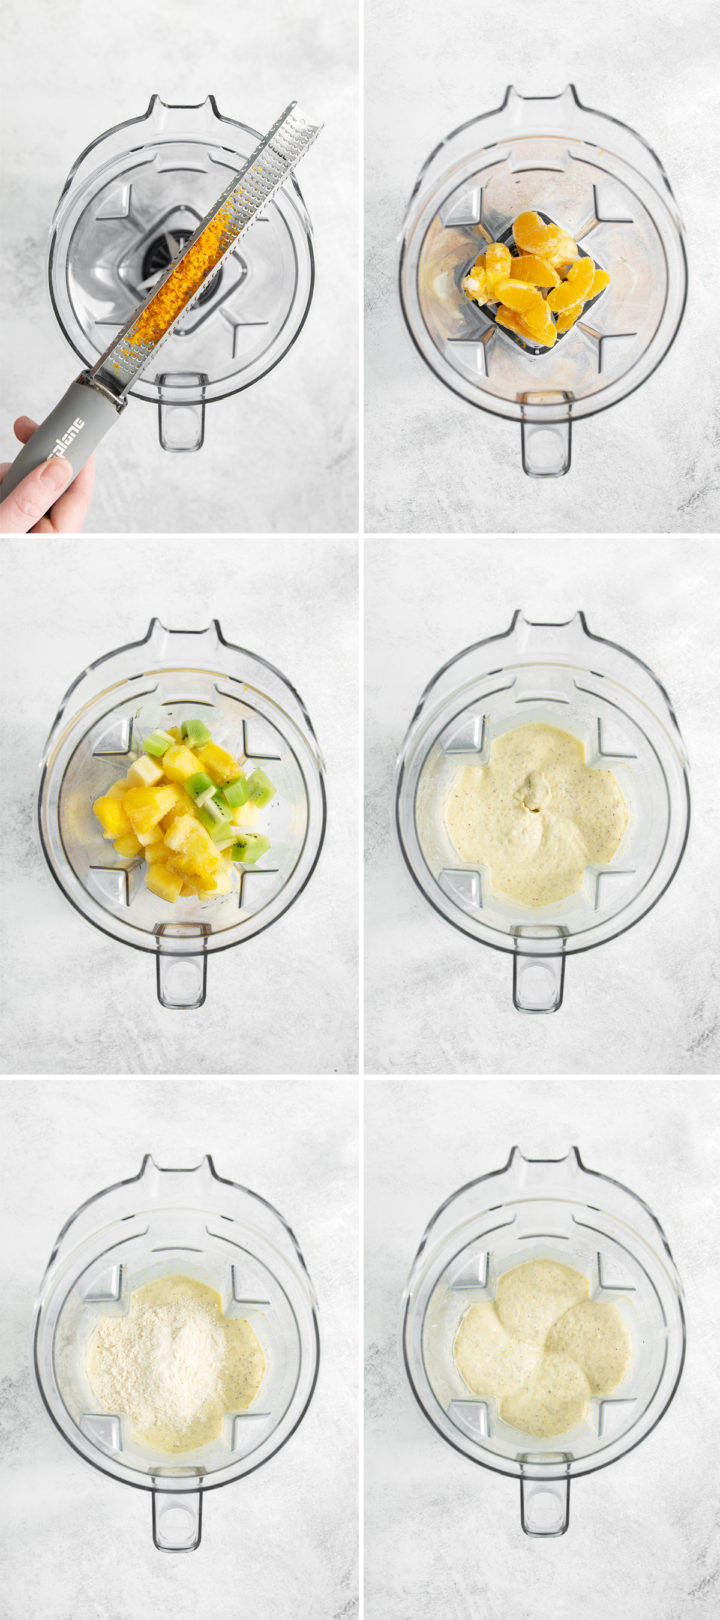 step by step photos showing how to make an orange pineapple smoothie